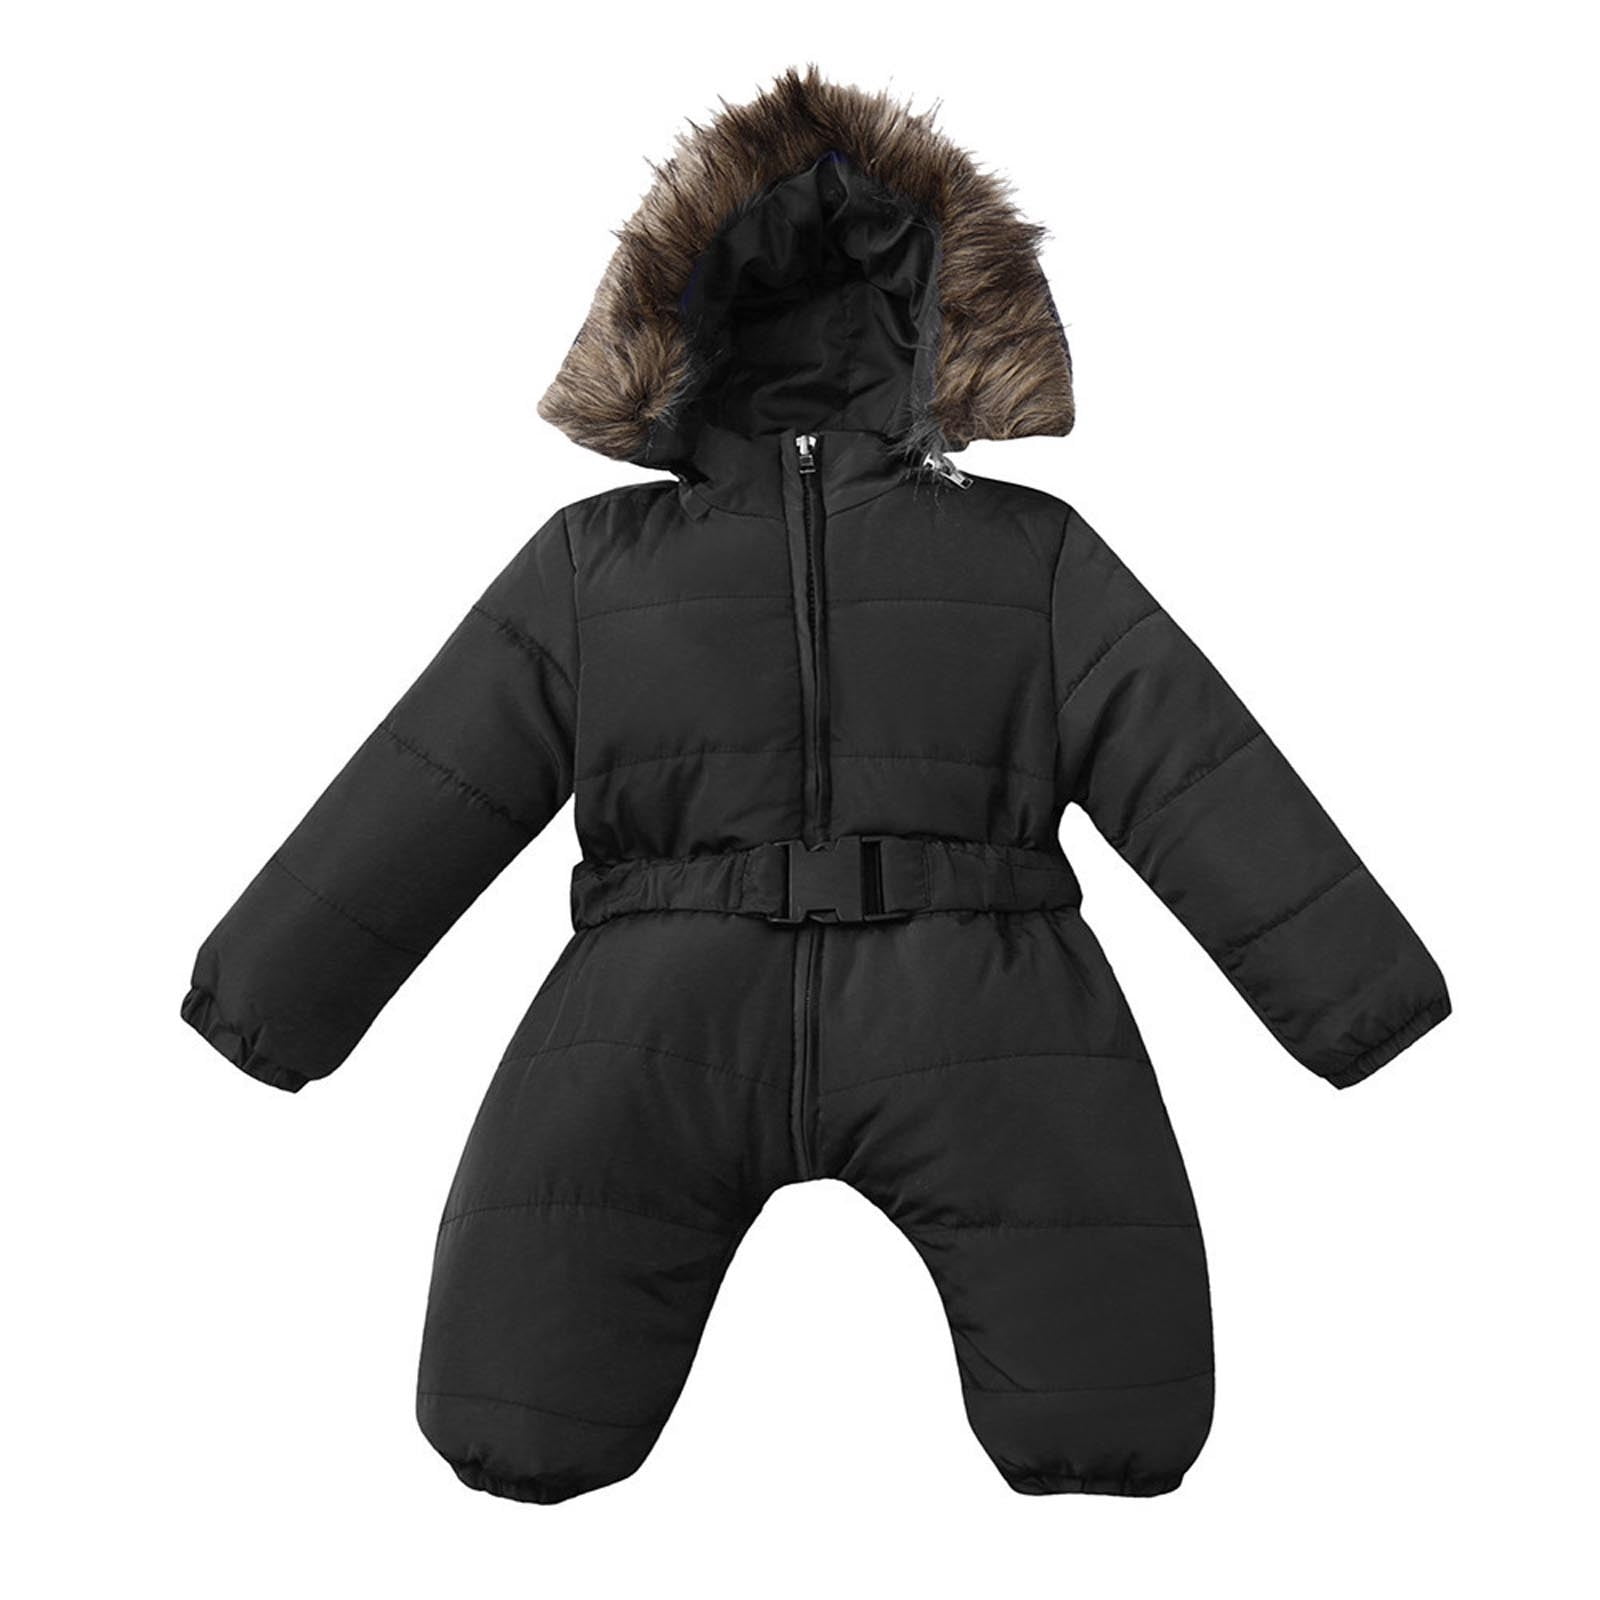 Kaizizi Infant Baby Boys Girls Winter One Piece Footed Snowsuit Fur Trim Hooded Zipper Jumpsuit Coat Thick Warm Down Rompers Outerwear with Gloves 